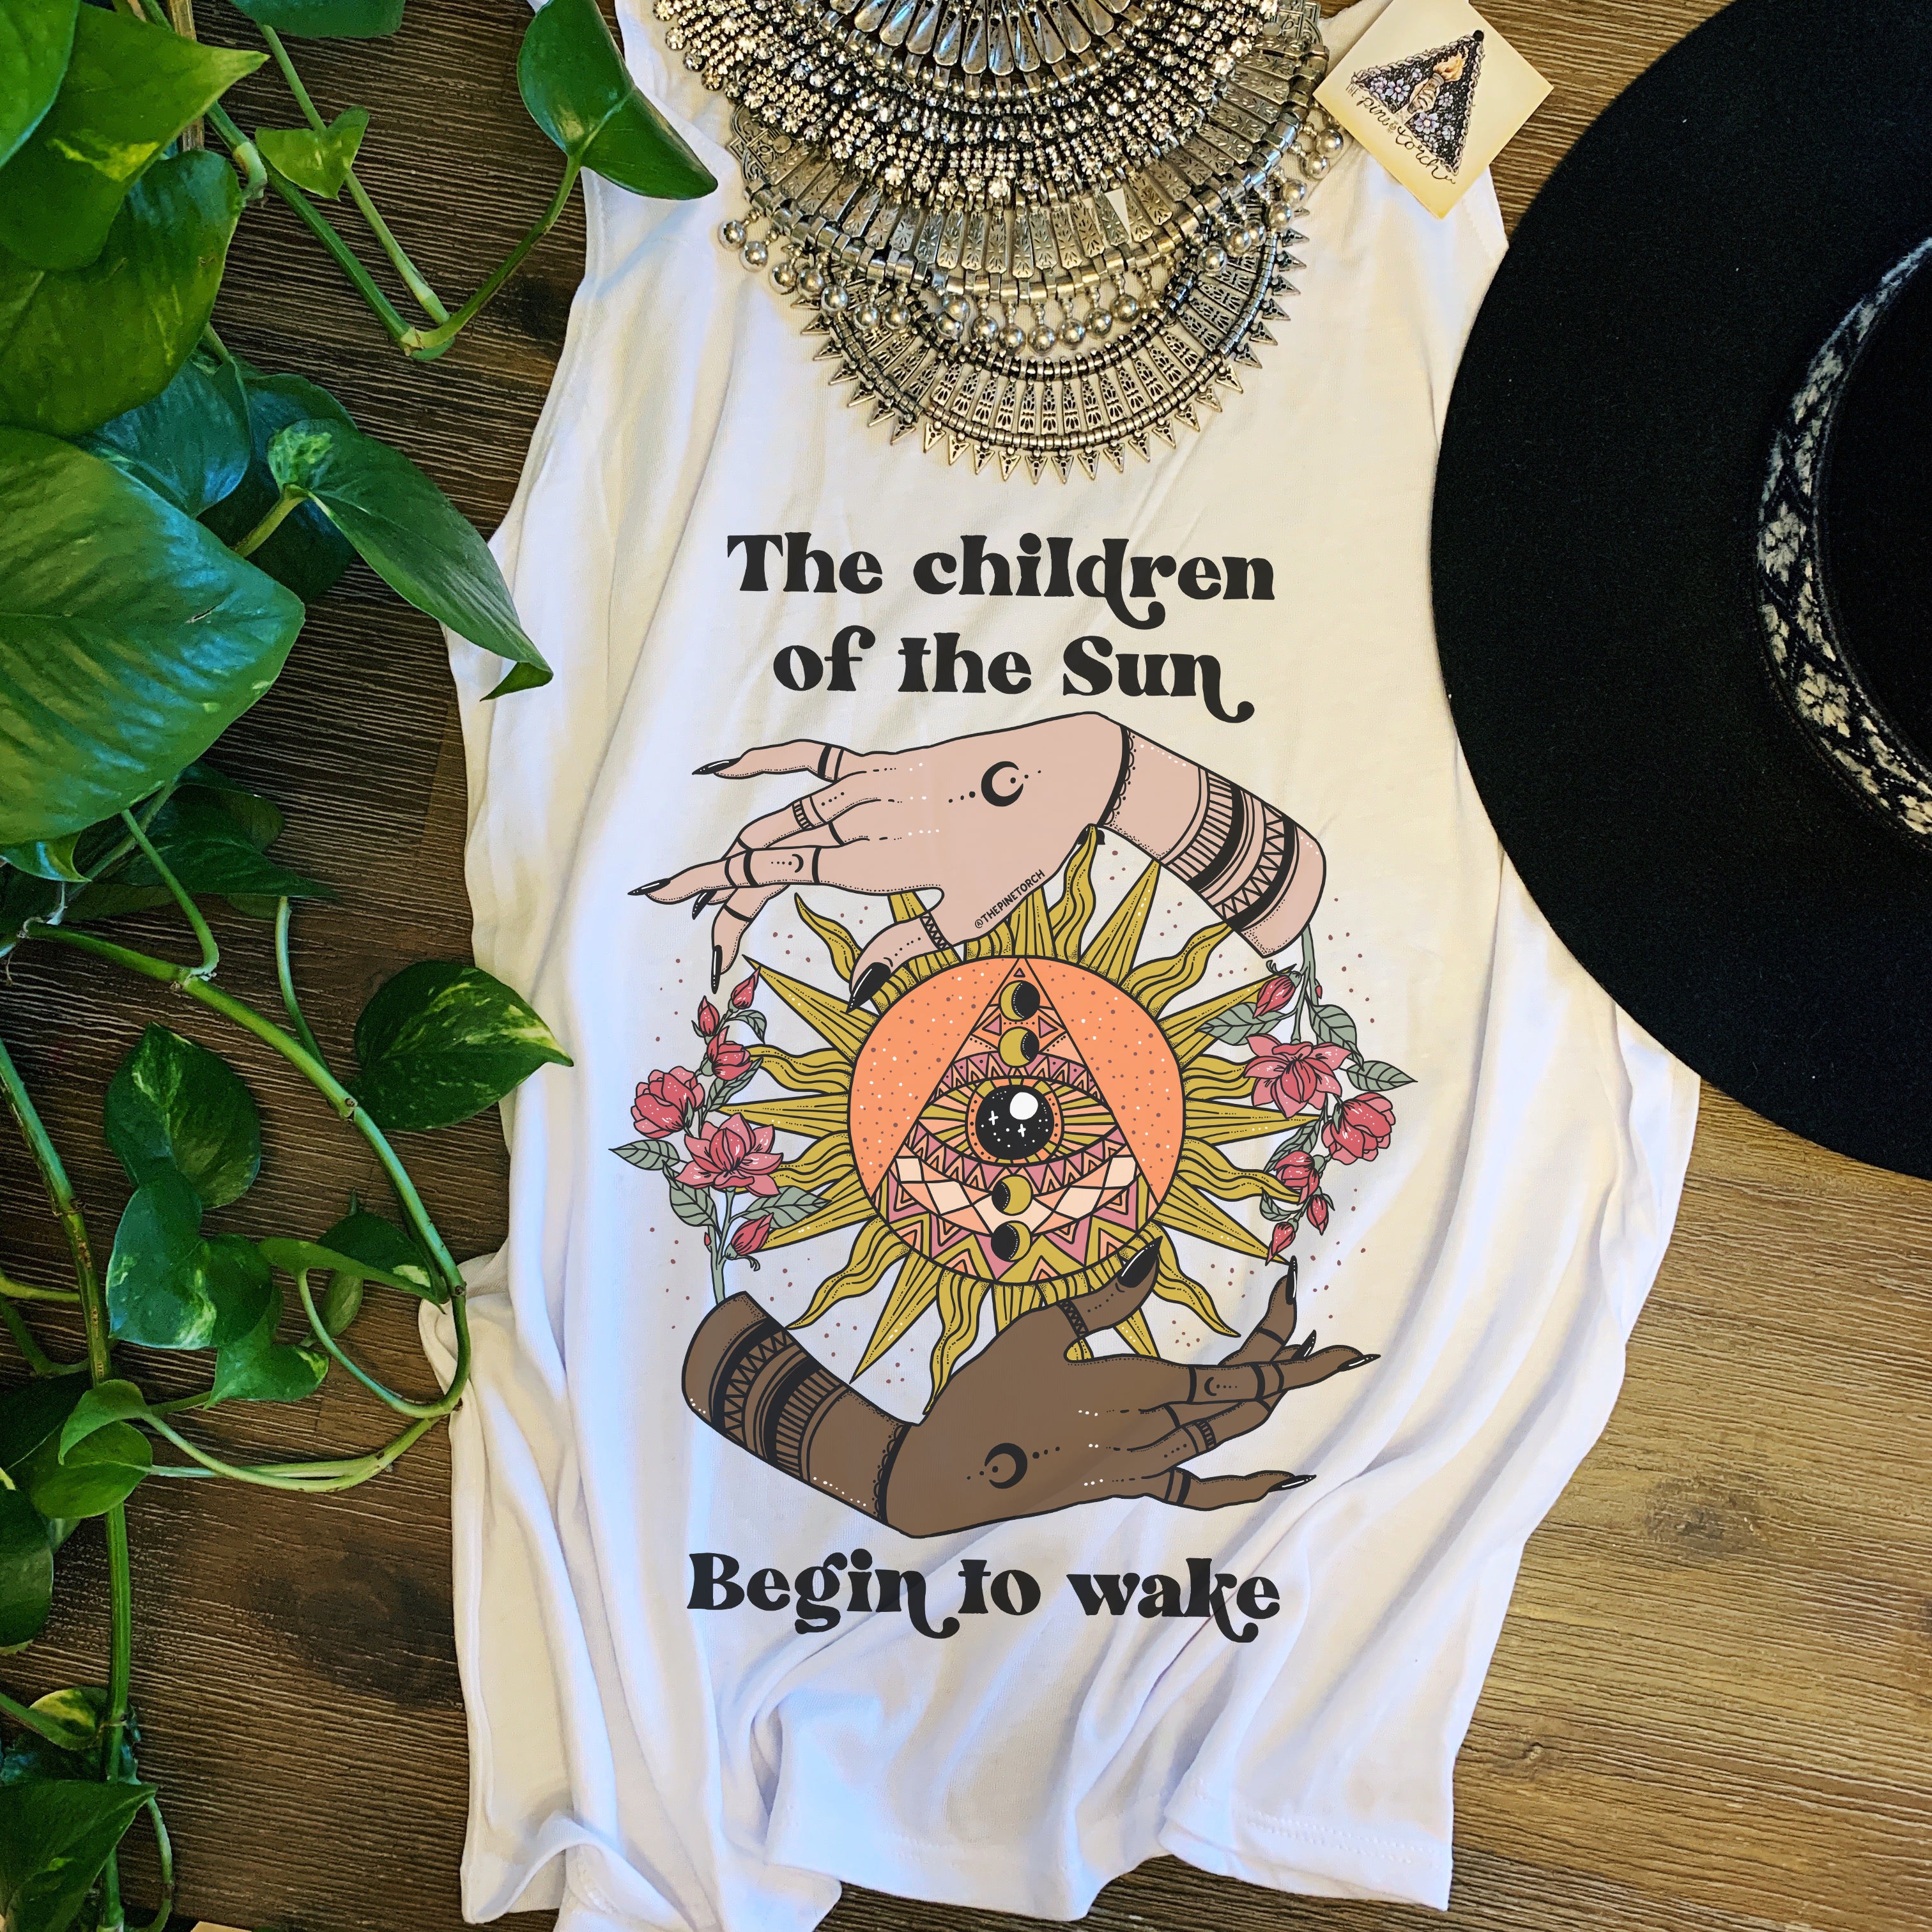 « CHILDREN OF THE SUN » SLOUCHY OR RACERBACK TANK